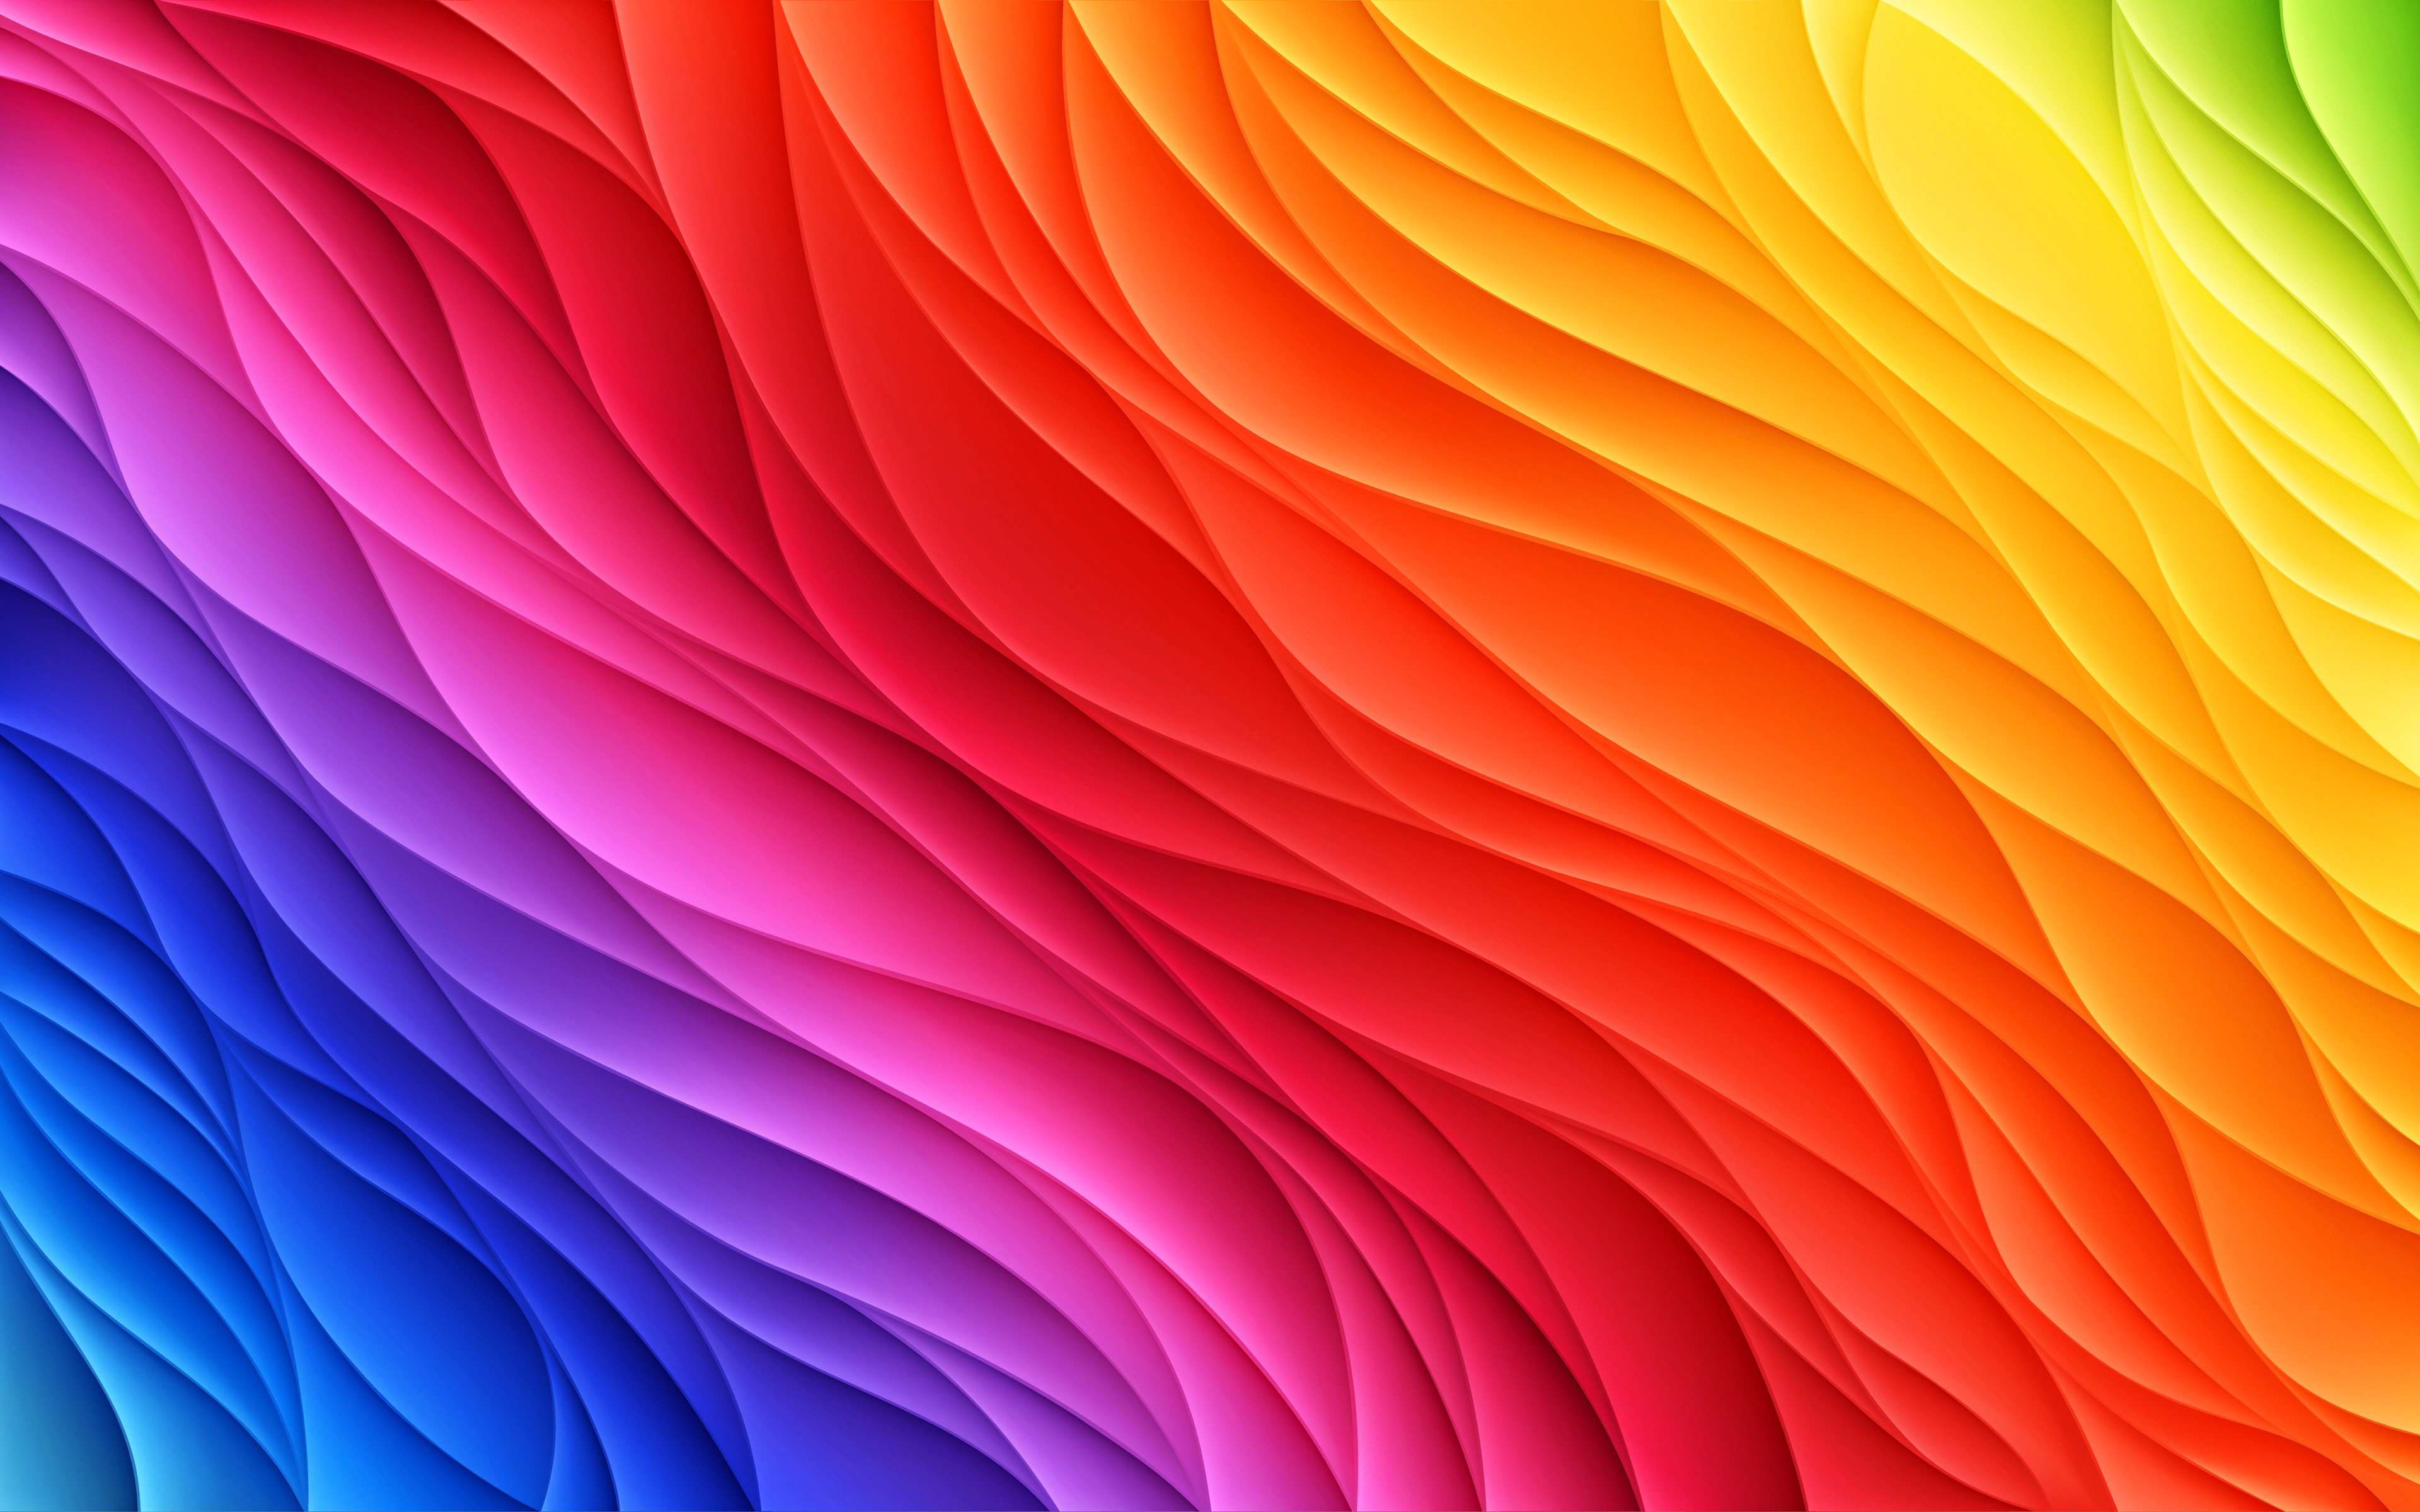 Download Wallpapers 4k 3d Abstract Waves Rainbow Backgrounds Wavy 3d